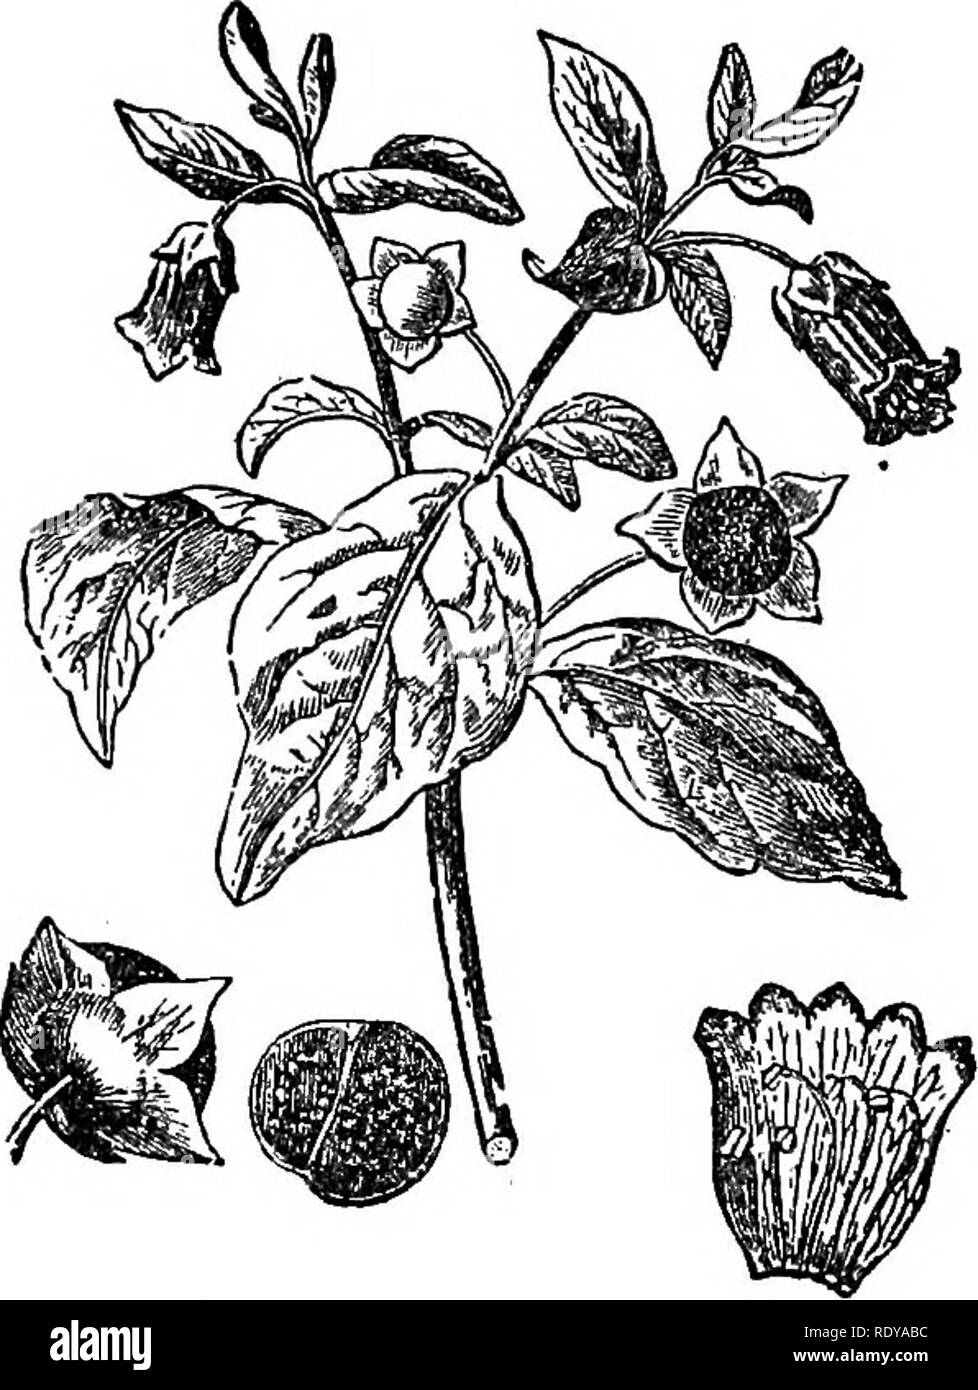 . A manual of poisonous plants, chiefly of eastern North America, with brief notes on economic and medicinal plants, and numerous illustrations. Poisonous plants. 716 MANUAL OF POISONOUS PLANTS. Fig, 416. Sleeping or Deadly Night-shade {Atropa Belladonna). Tip of flowering and fruiting branch; entire fruit; cross section of fruit; corolla cut open and spread out. Source of the belladonna of commerce. (From Ves- que's Traite de Botanique). elegans are frequently cultivated. The odor from the flowers of the latter is very overpowering. The berries of C. pallidum, are said to be poisonous, but bi Stock Photo